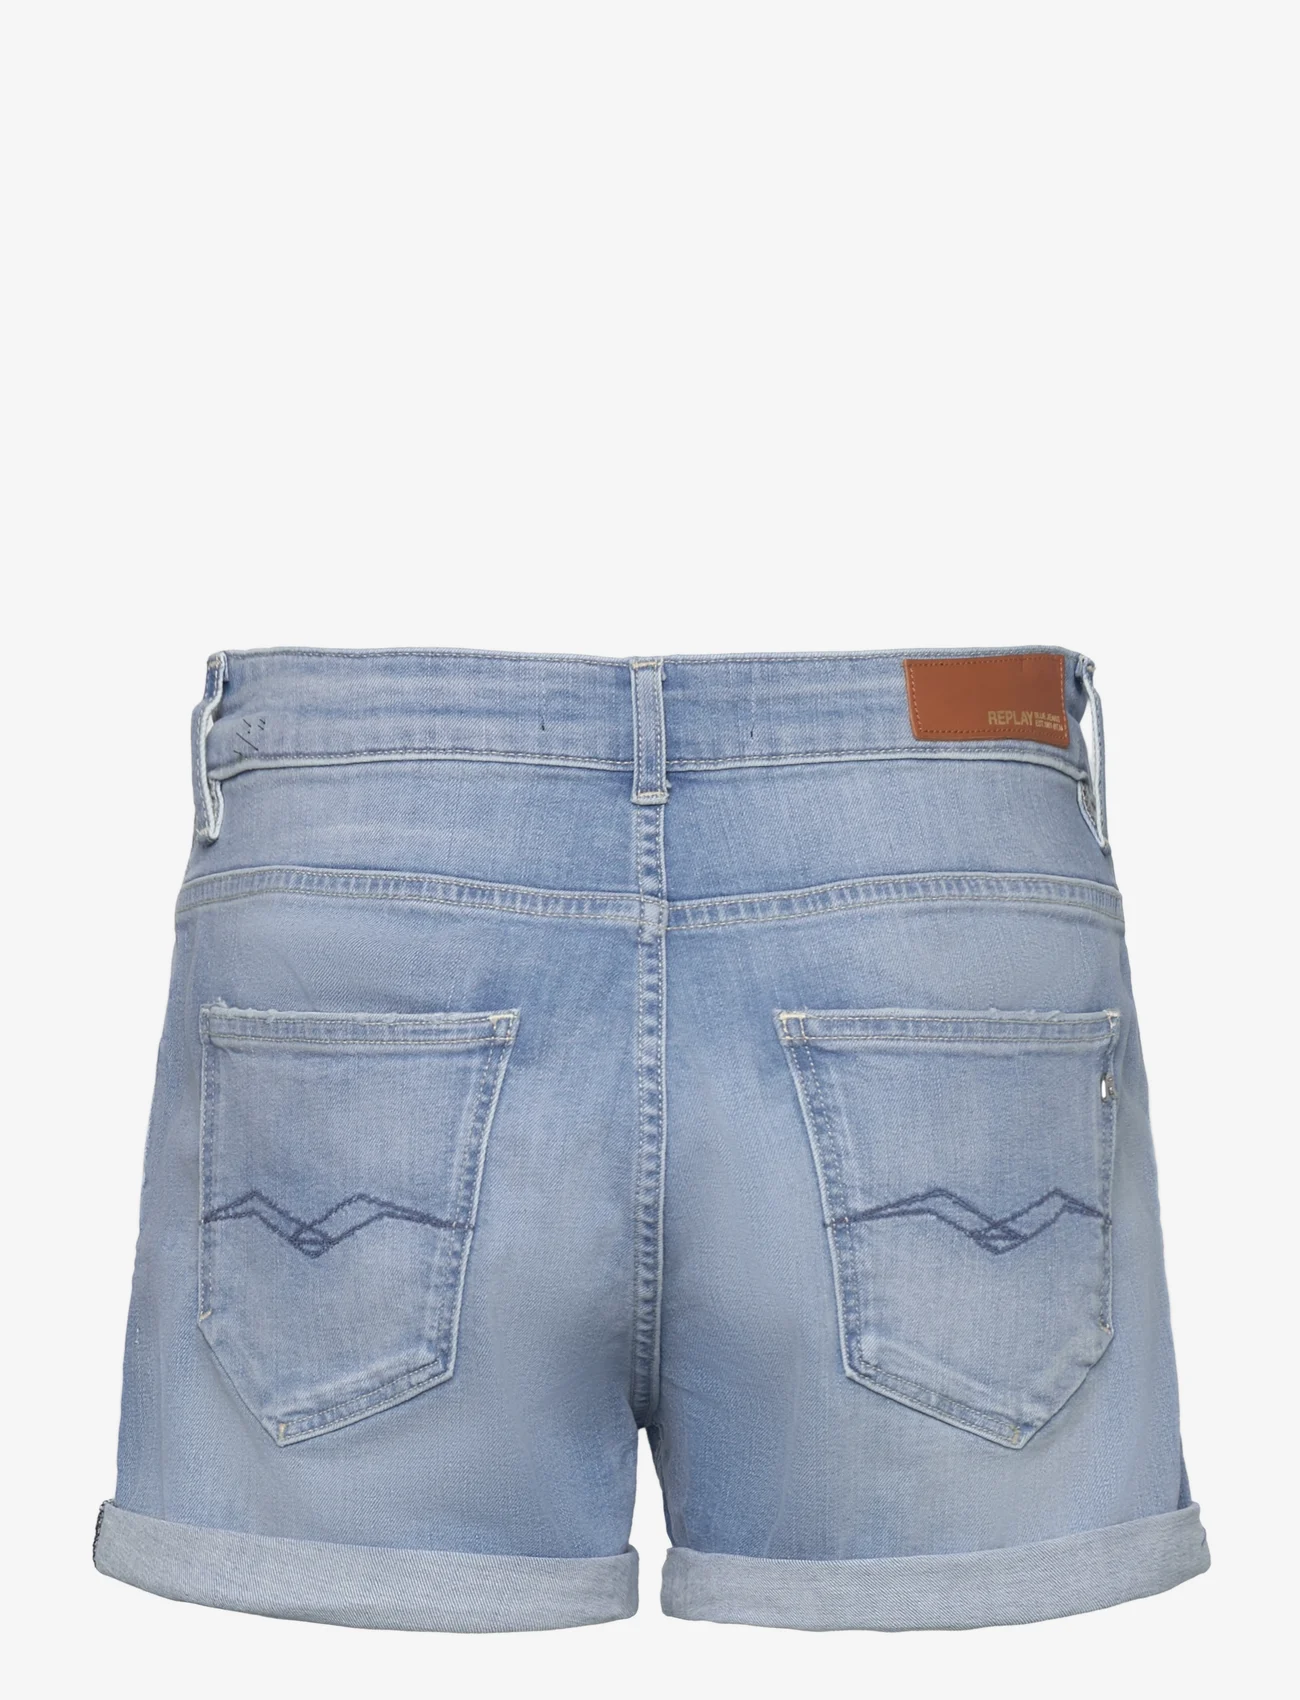 Replay - ANYTA Shorts  573 - jeansshorts - blue - 1